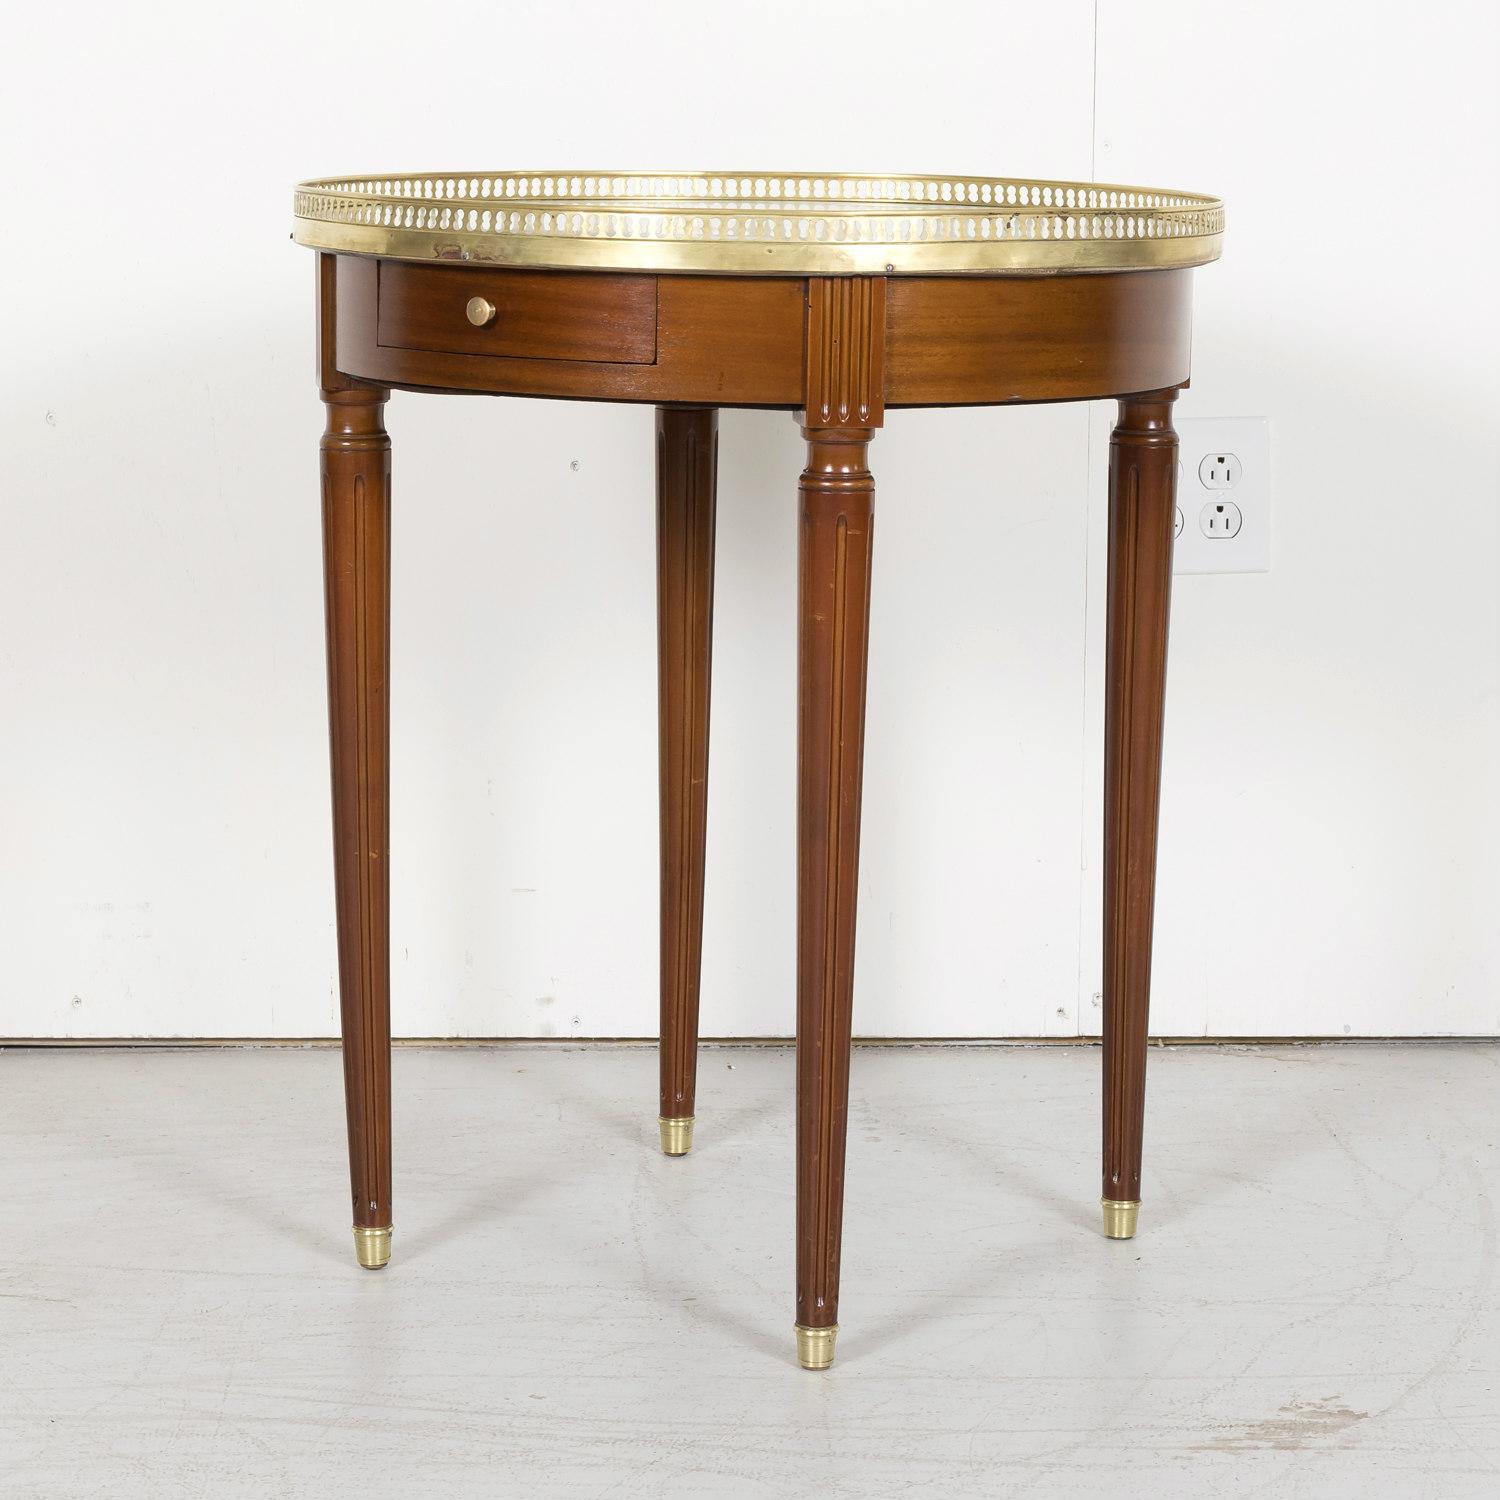 Early 20th Century Antique French Louis XVI Style Mahogany Bouillotte Side Table with Marble Top